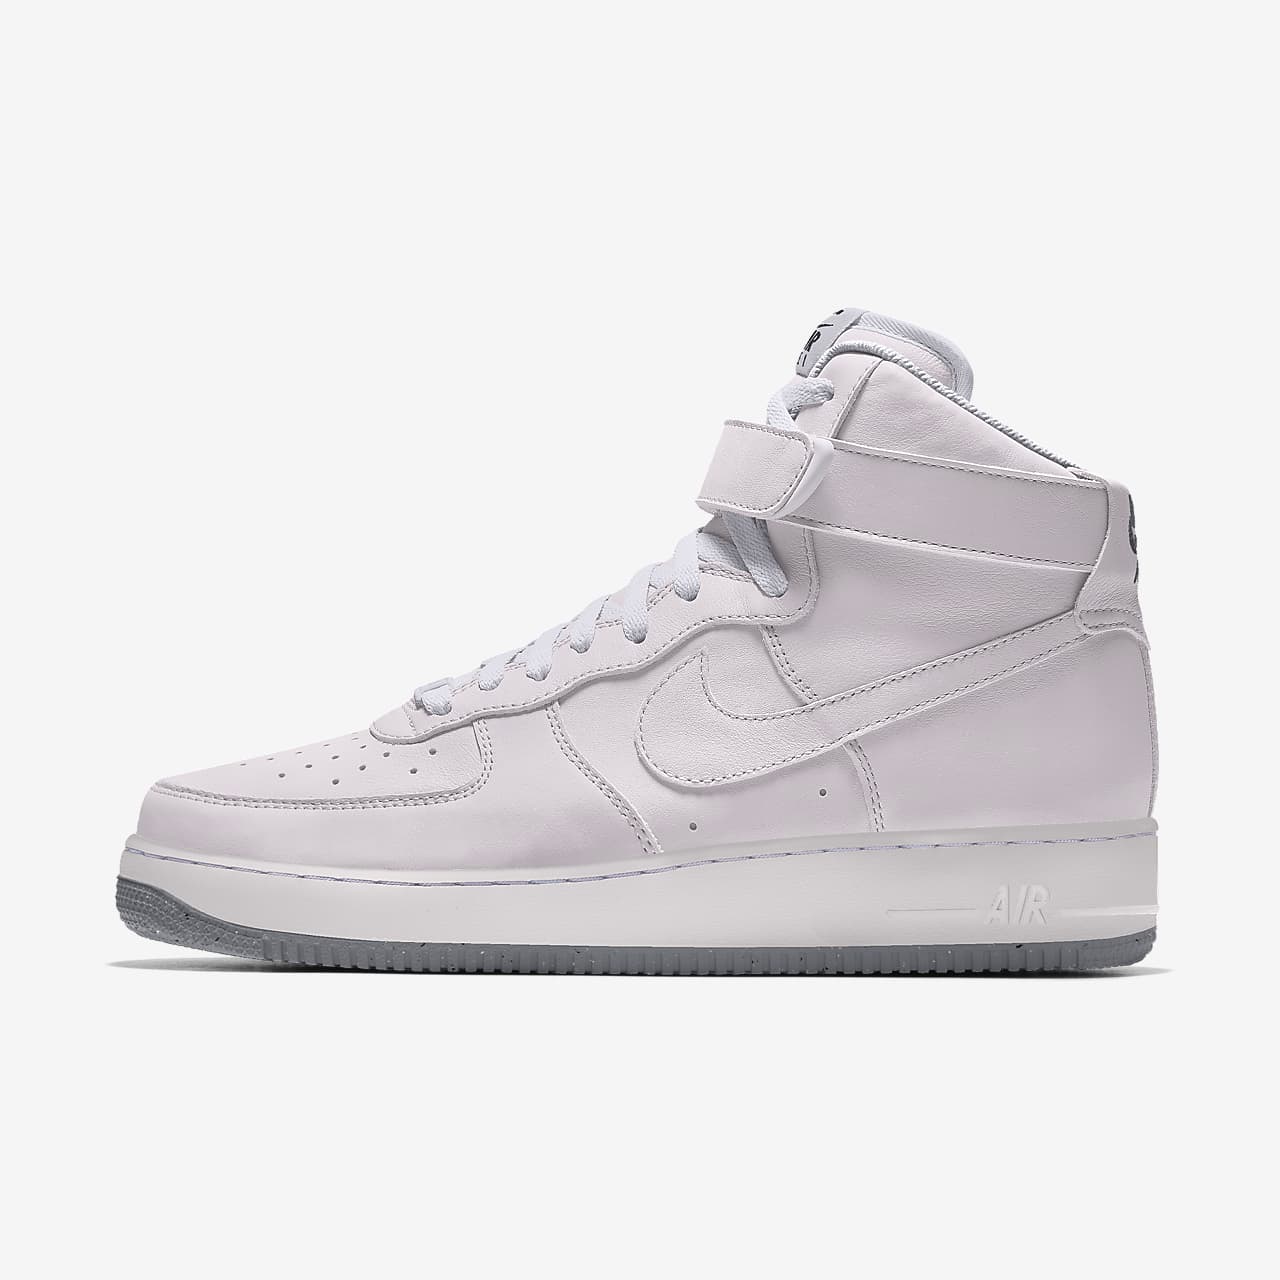 Chaussure personnalisable Nike Air Force 1 High By You pour Femme